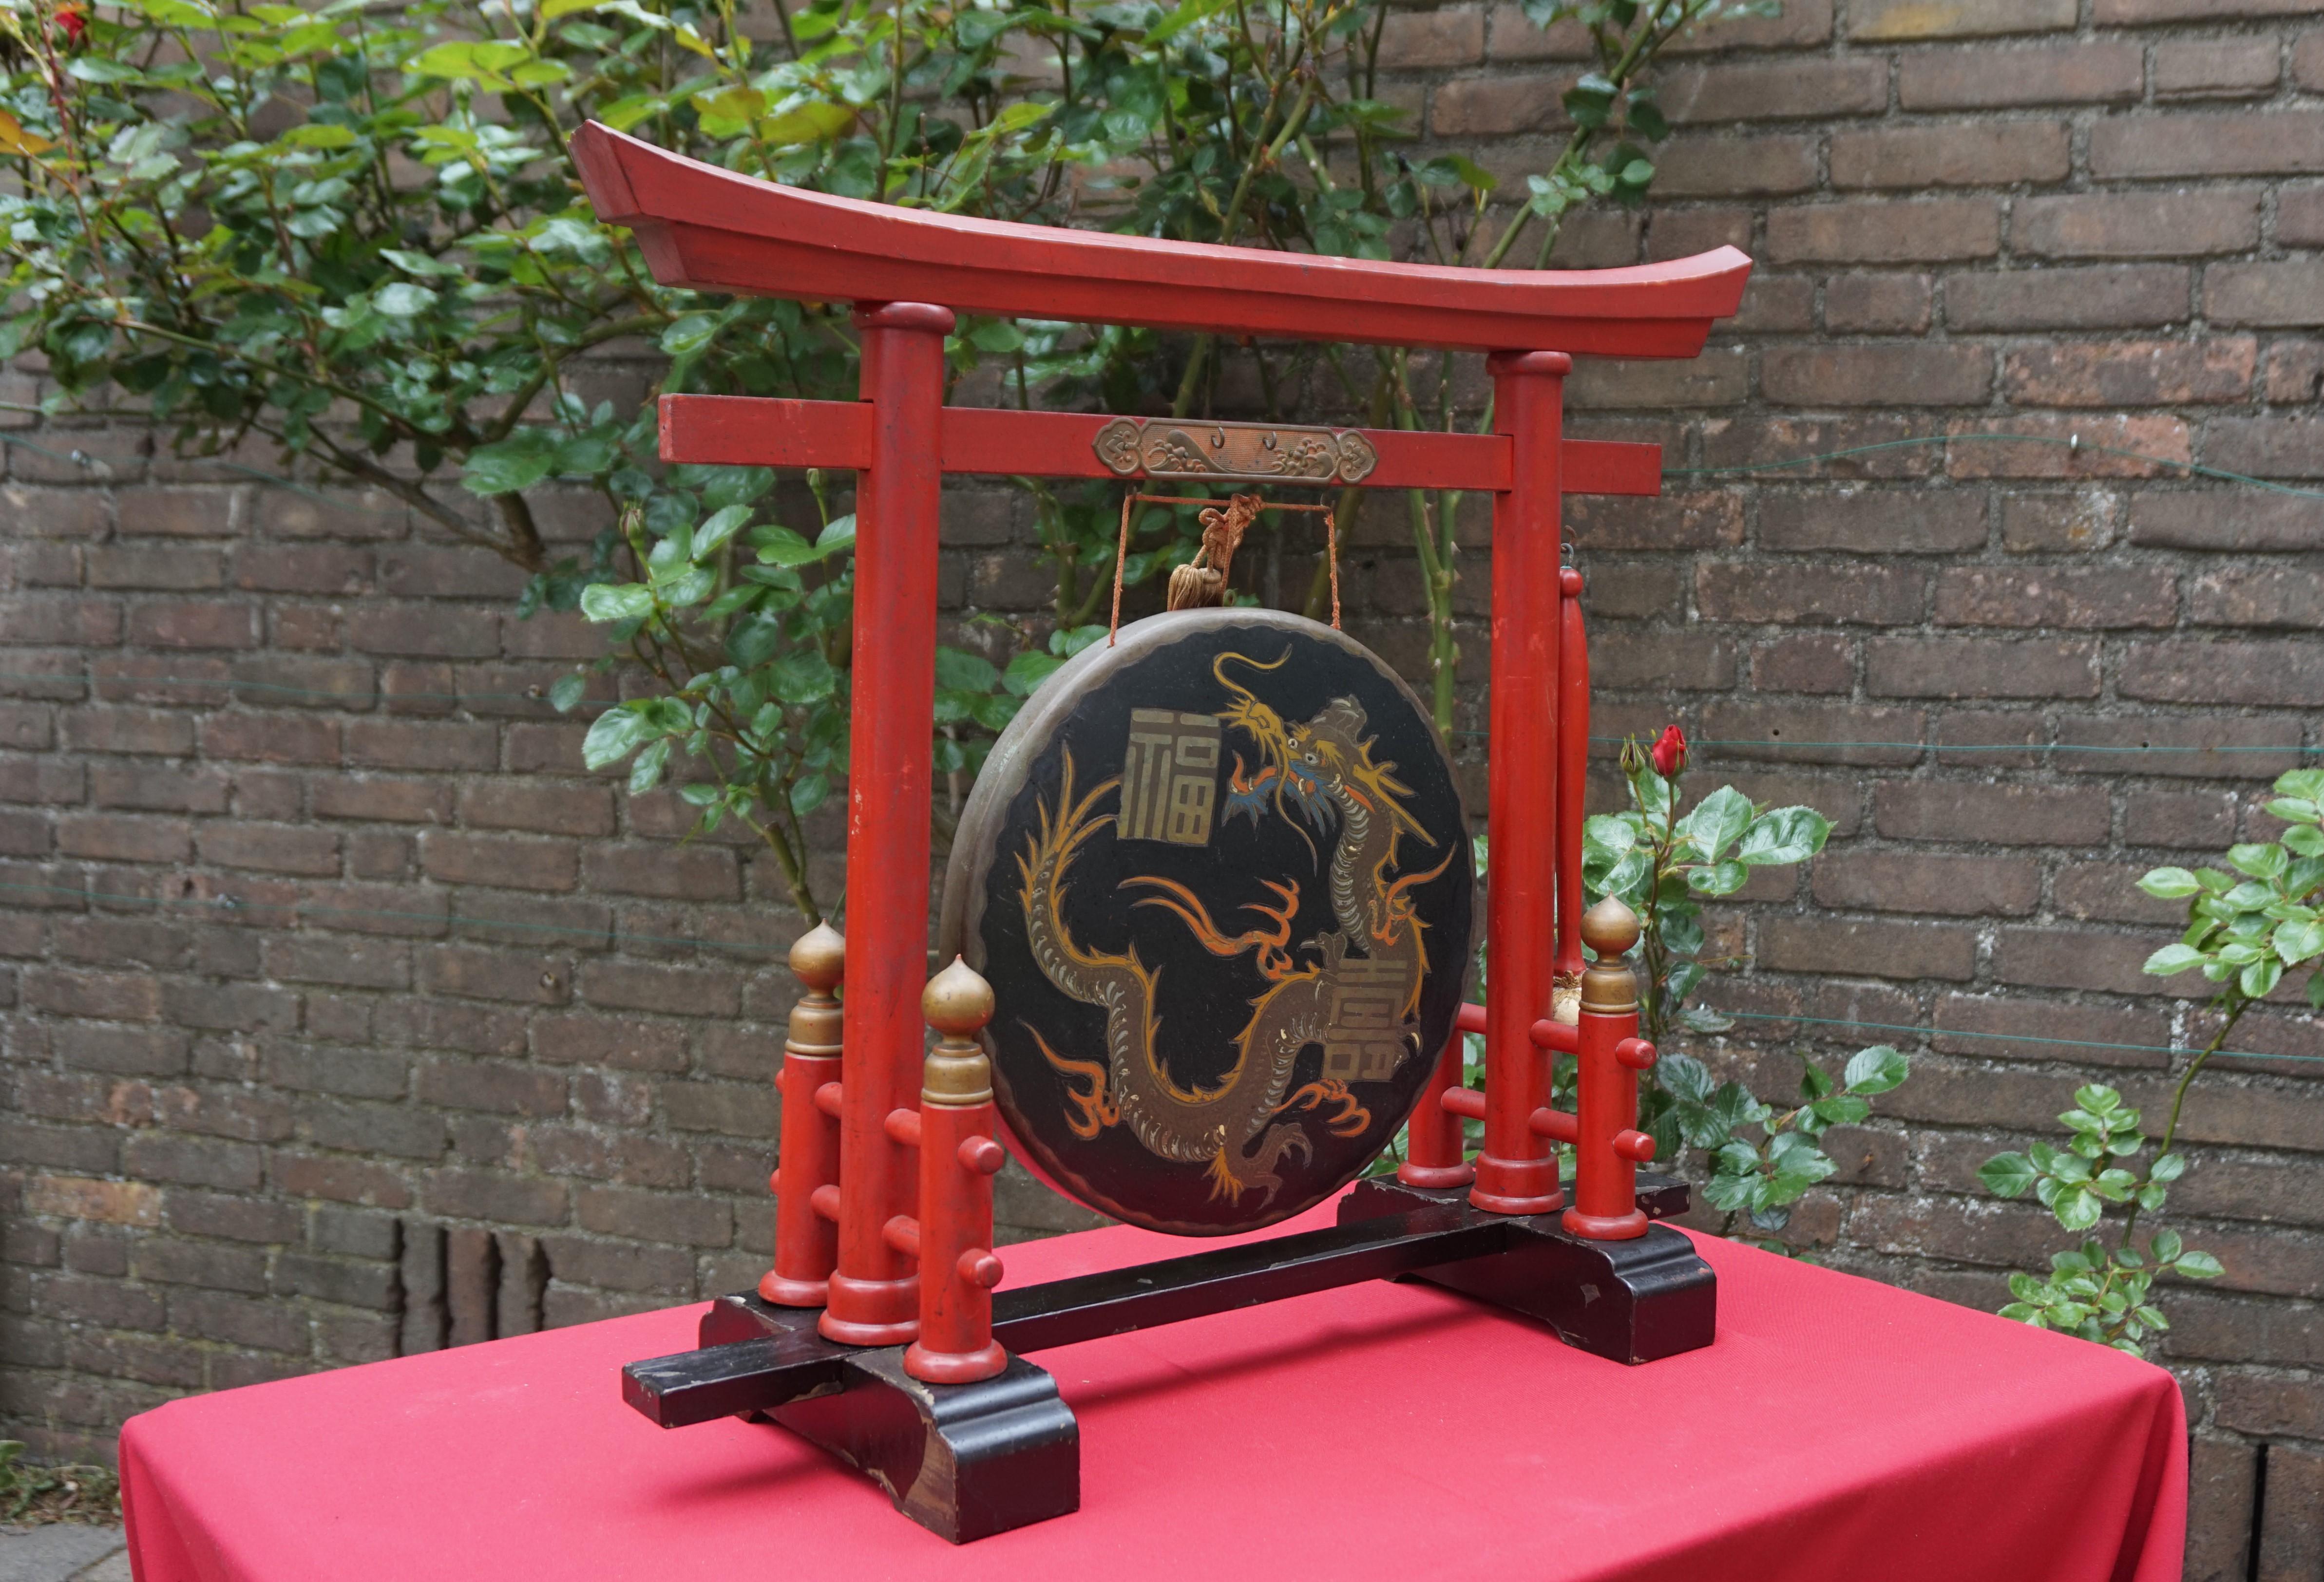 Rare and striking (pun intended) Chinese gong.

This hand-crafted Chinese gong from the early 1900s is both practical to use and beautiful to look at. The gong itself is wonderfully decorated with a hand-painted dragon and two Chinese symbols that